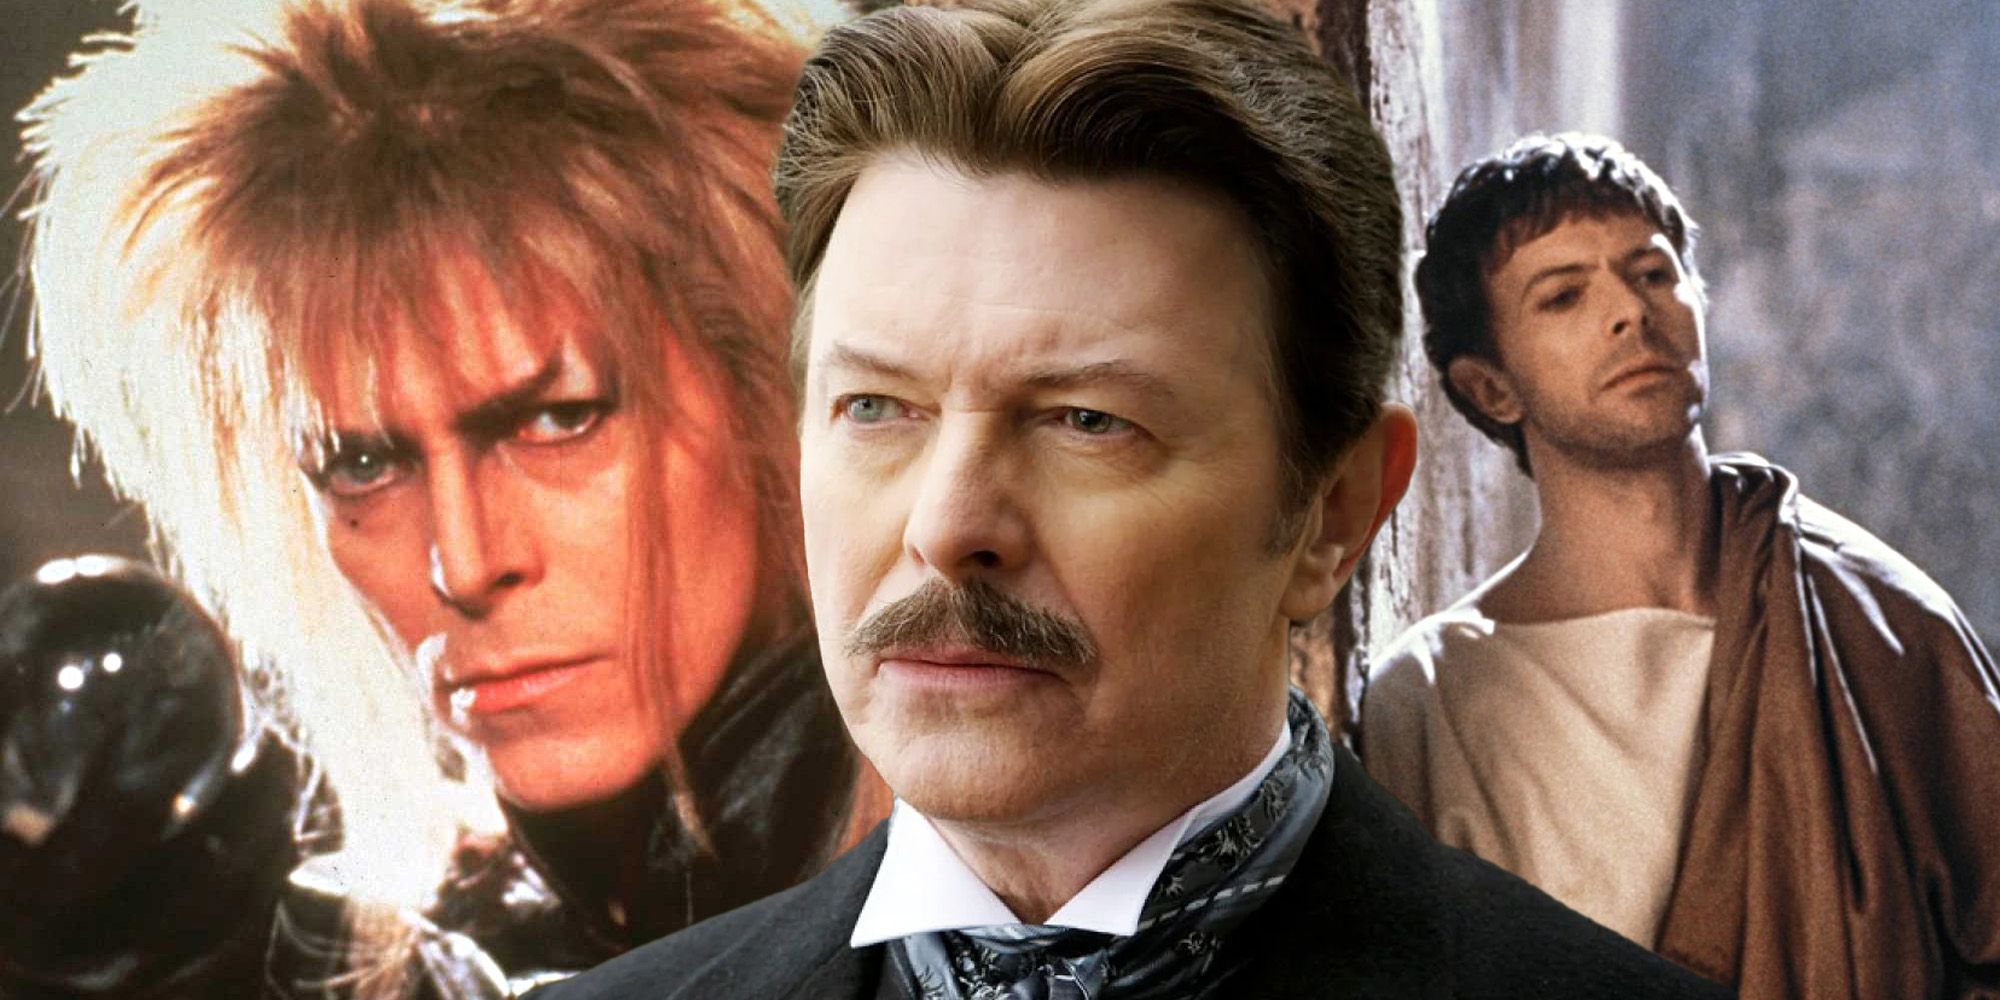 David Bowie The prestige the Labyrinth the last temptation of christ